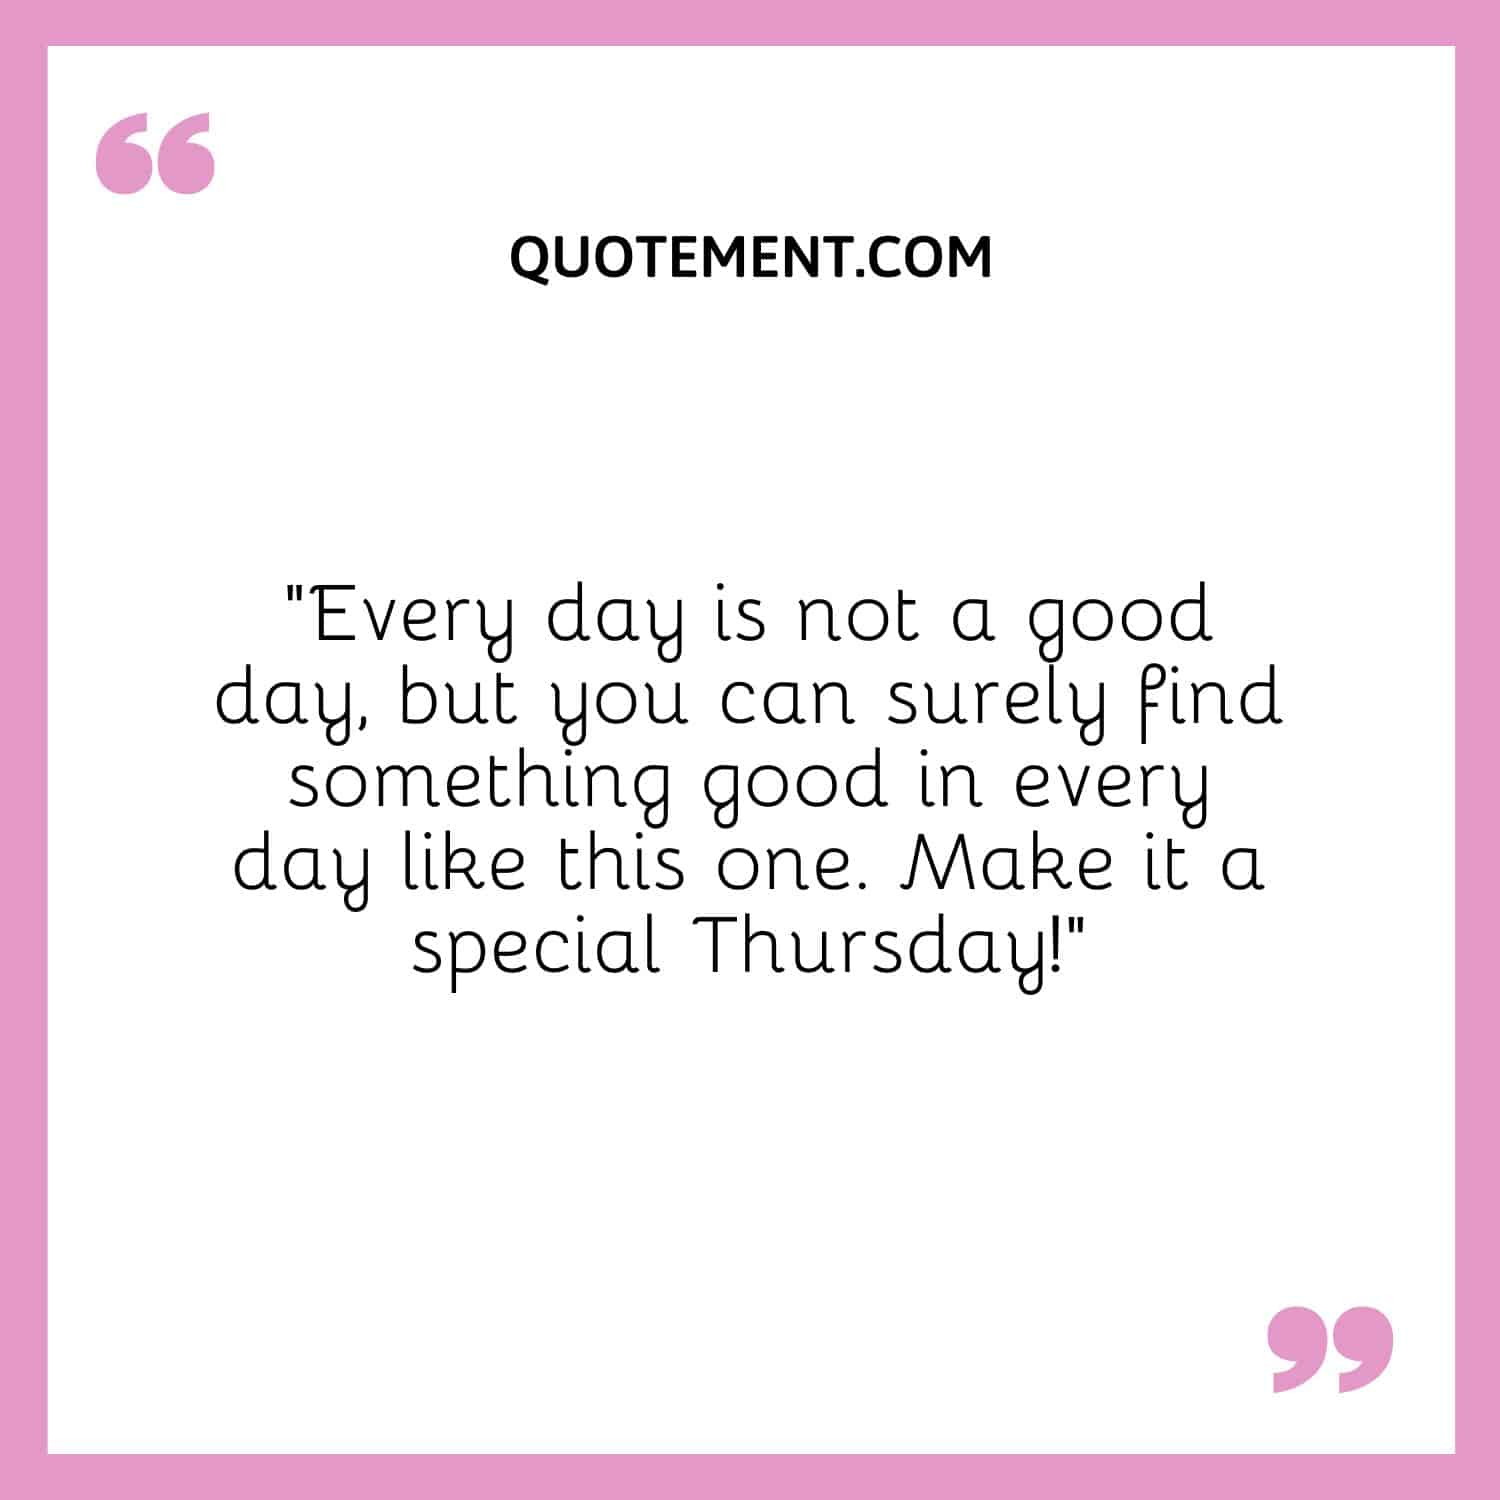 “Every day is not a good day, but you can surely find something good in every day like this one. Make it a special Thursday!”